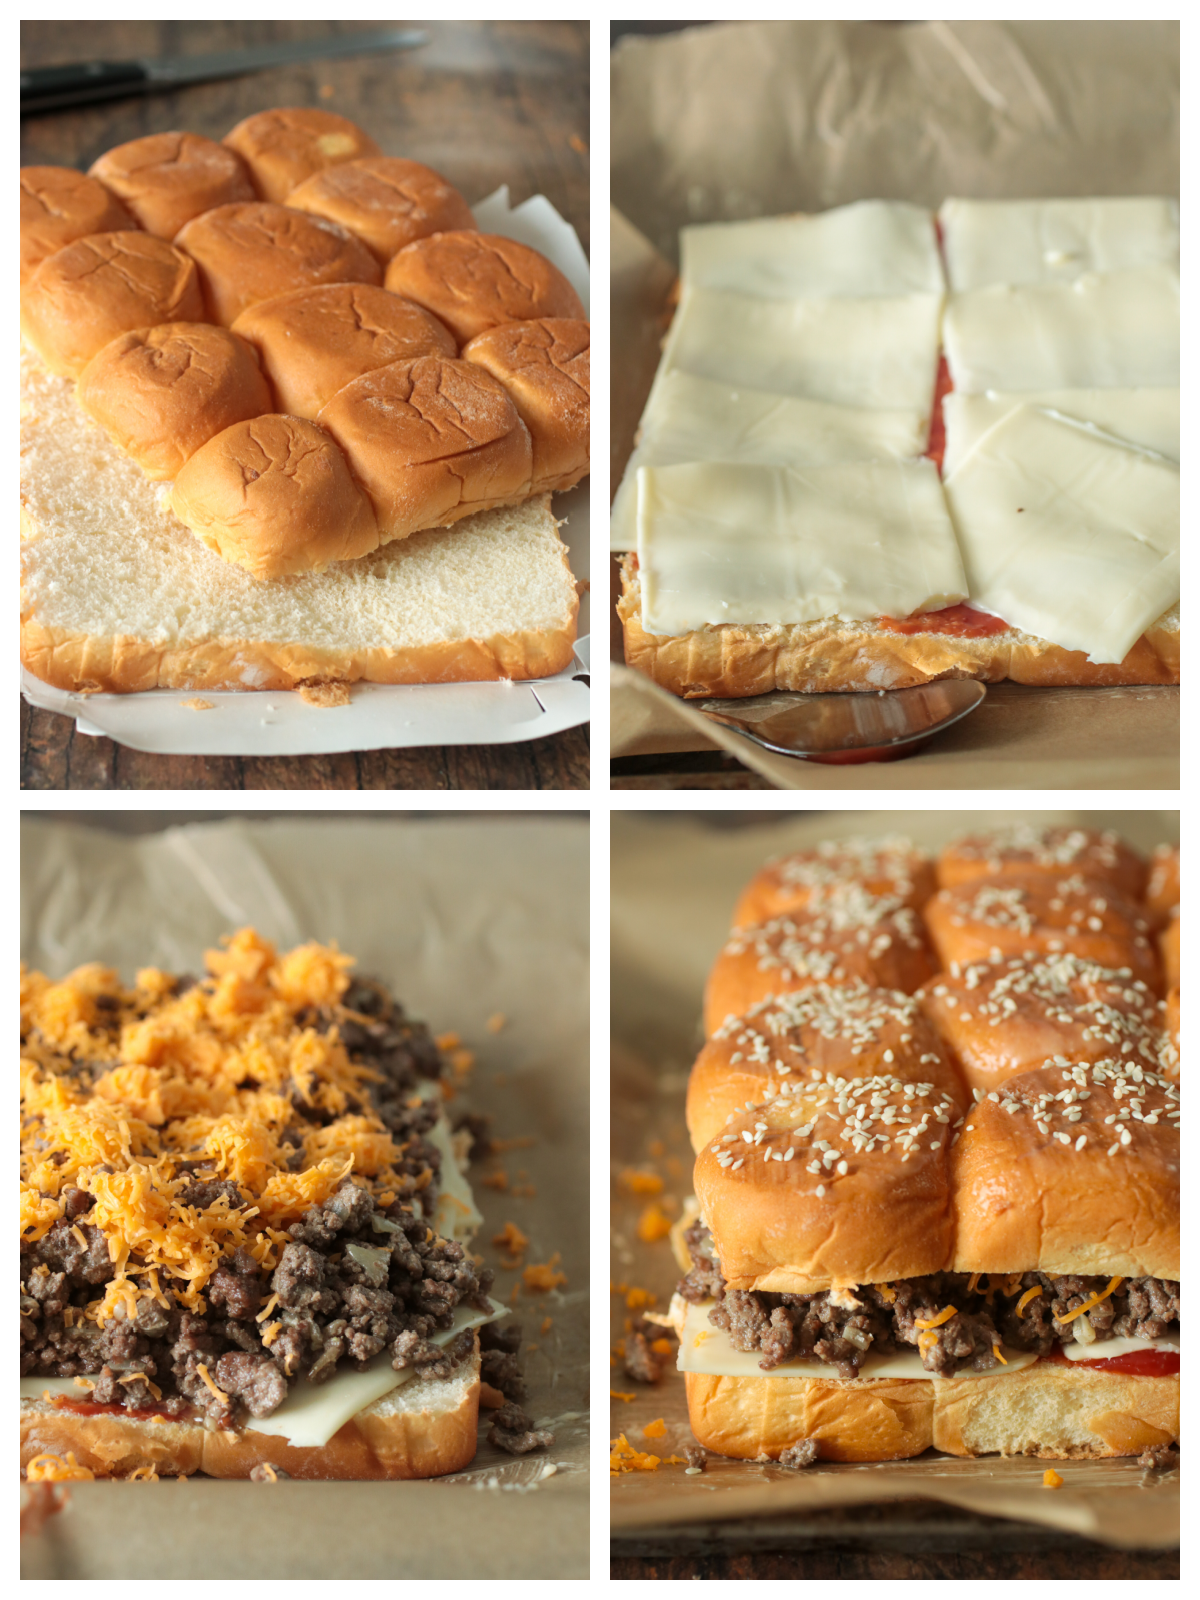 A collage showing the assembly of cheeseburger sliders.